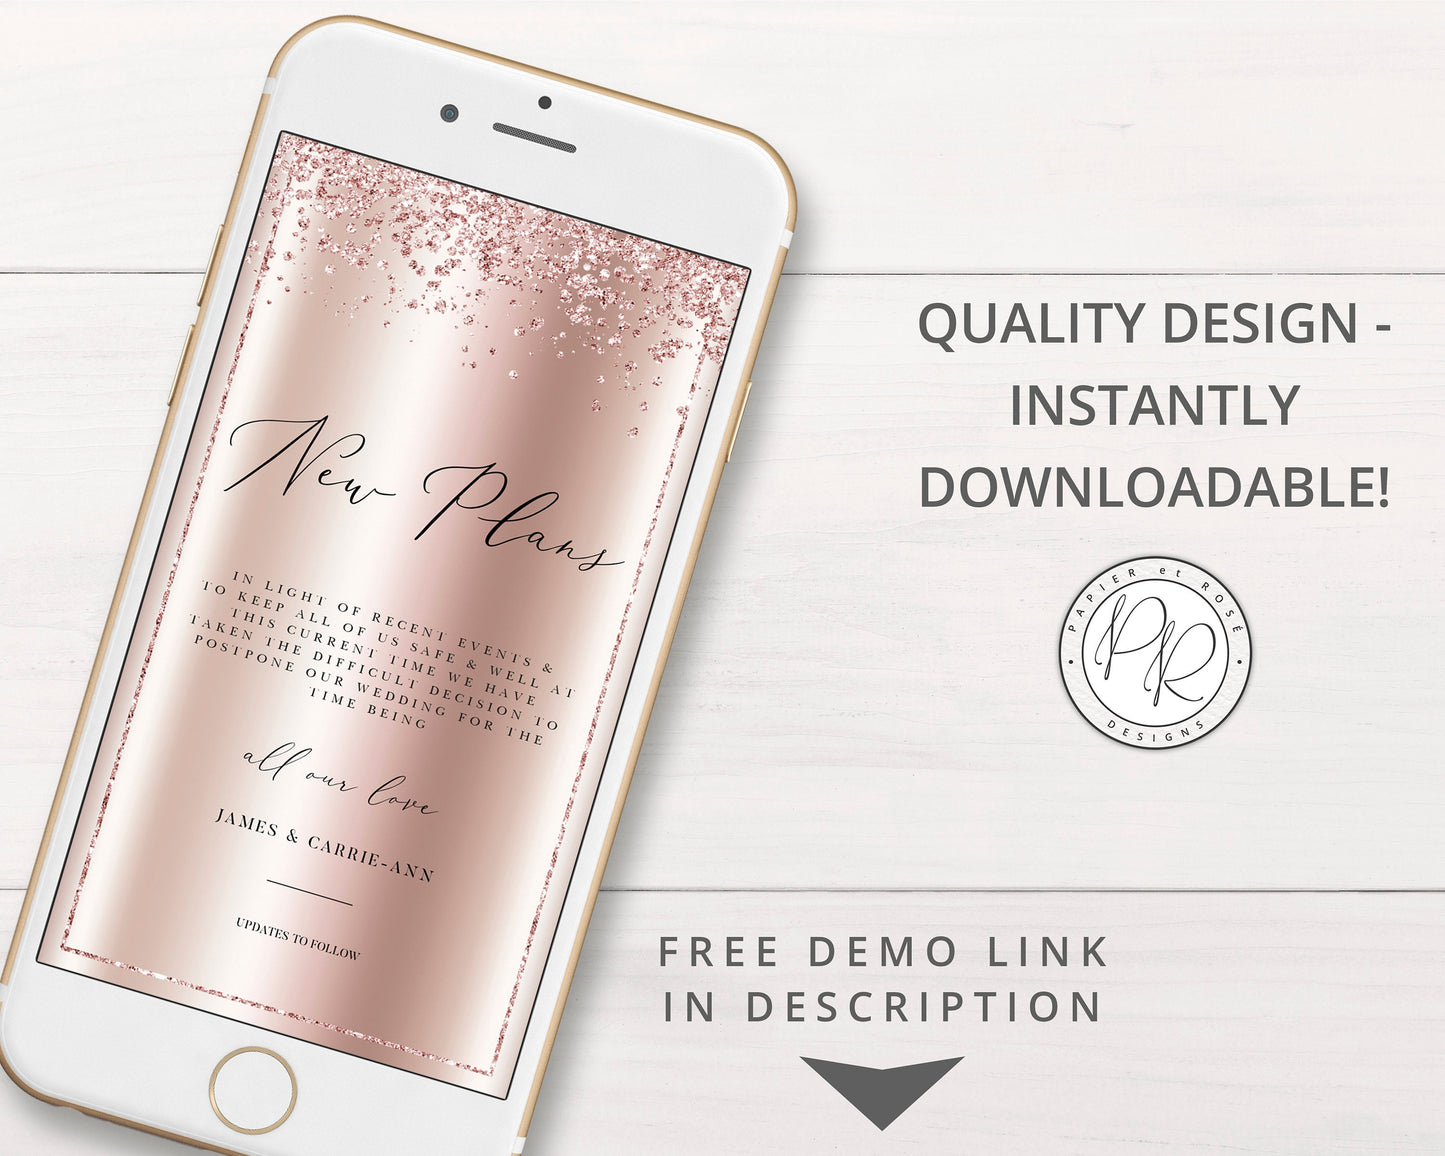 Instant Postponed Digital iPhone Phone Rose Gold Change of Plans Date  Wedding E-Card E-message | Announcement Editable Template - PRD003